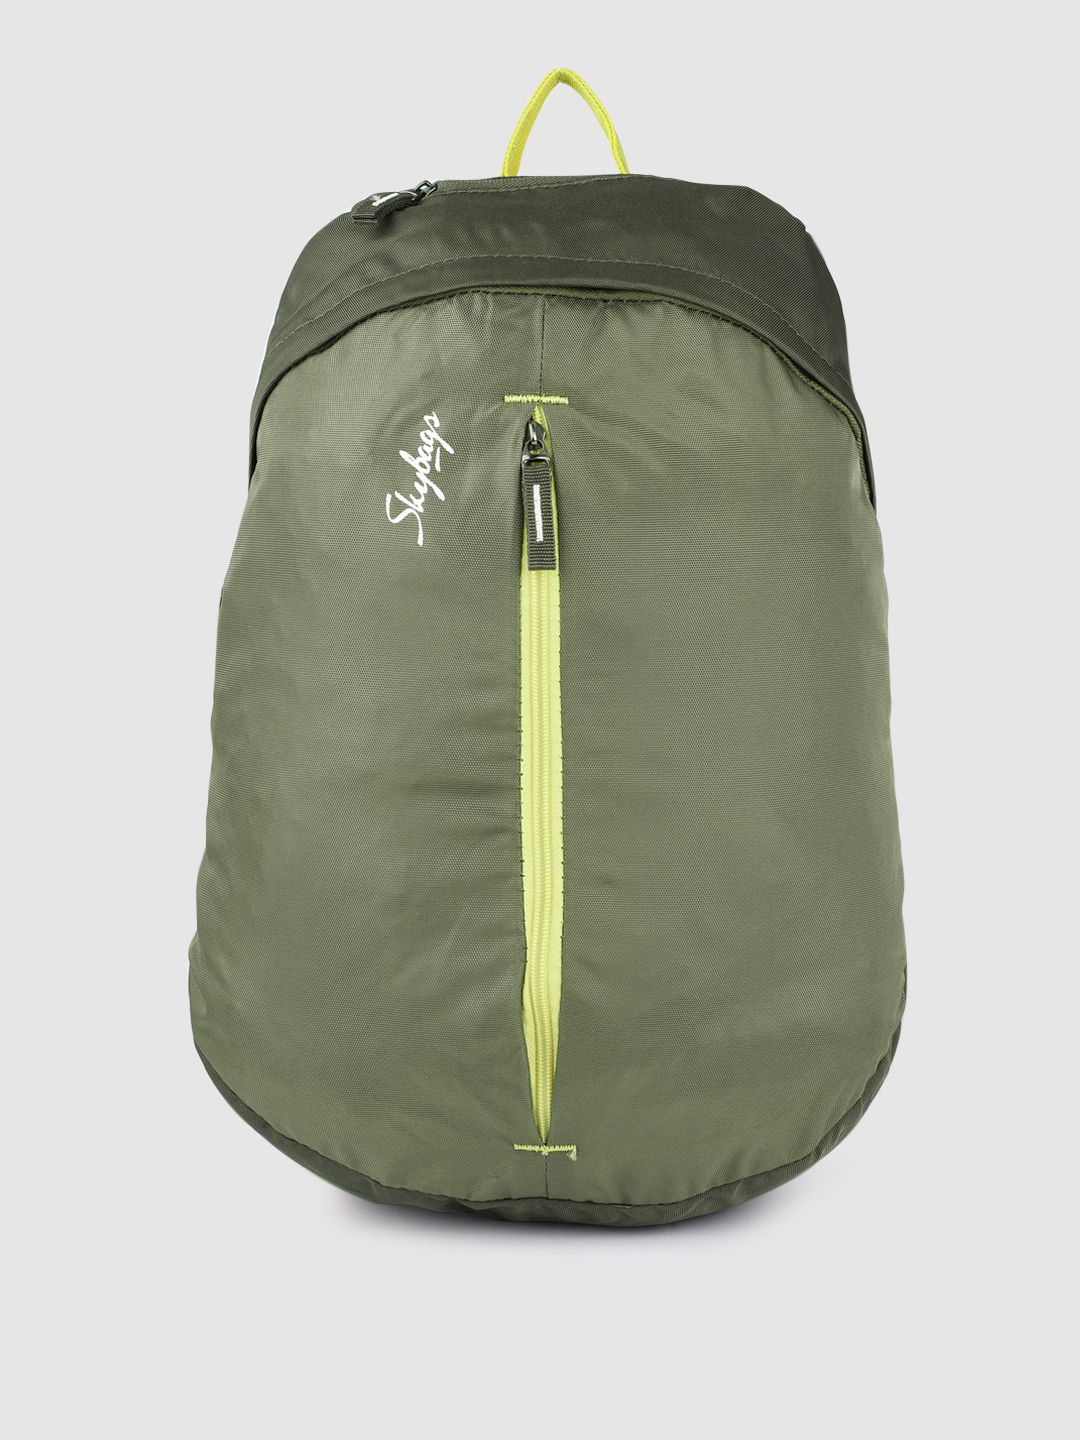 Skybags Unisex Green Solid Backpack Price in India